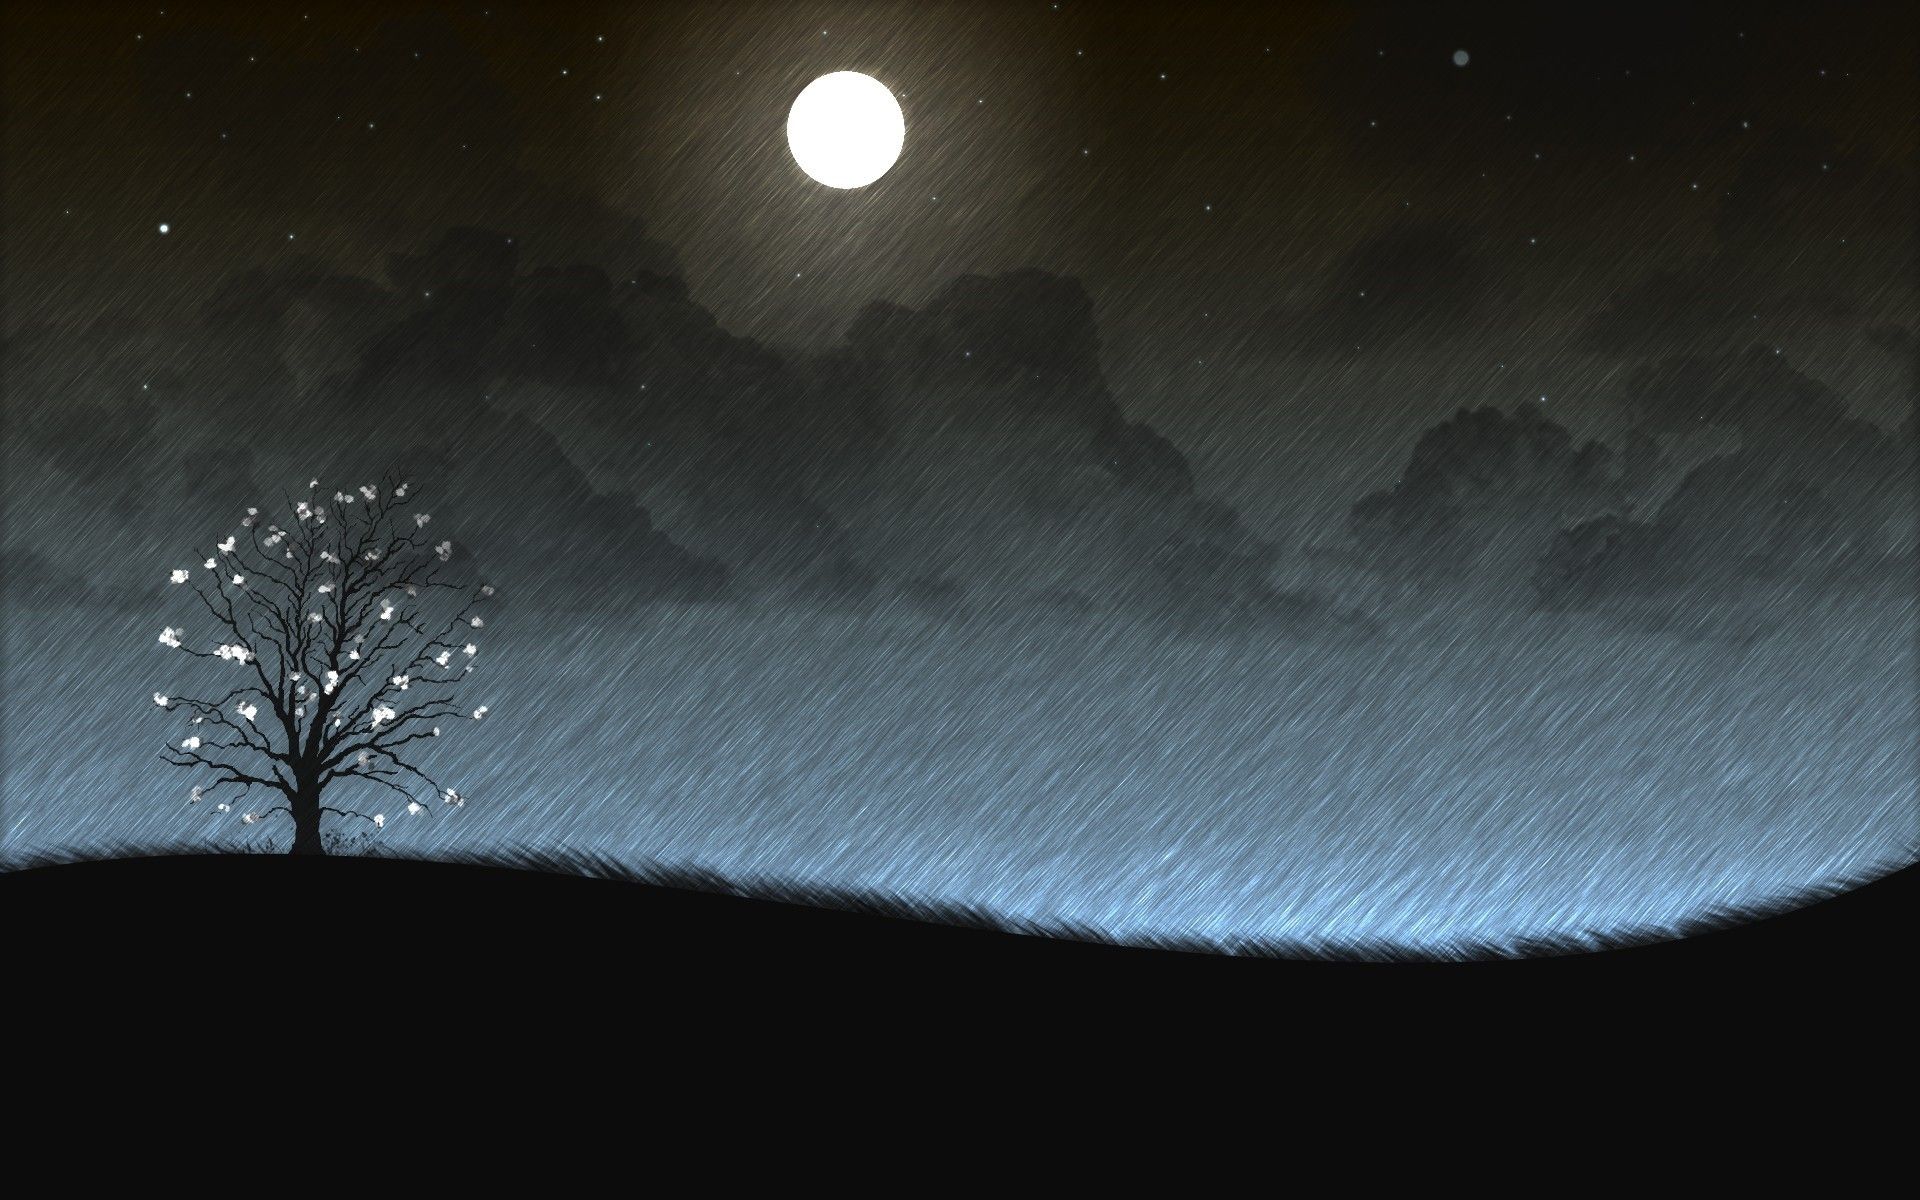 Rainy Moon Background. Awesome Moon Wallpaper, Pretty Moon Wallpaper and Moon Wallpaper